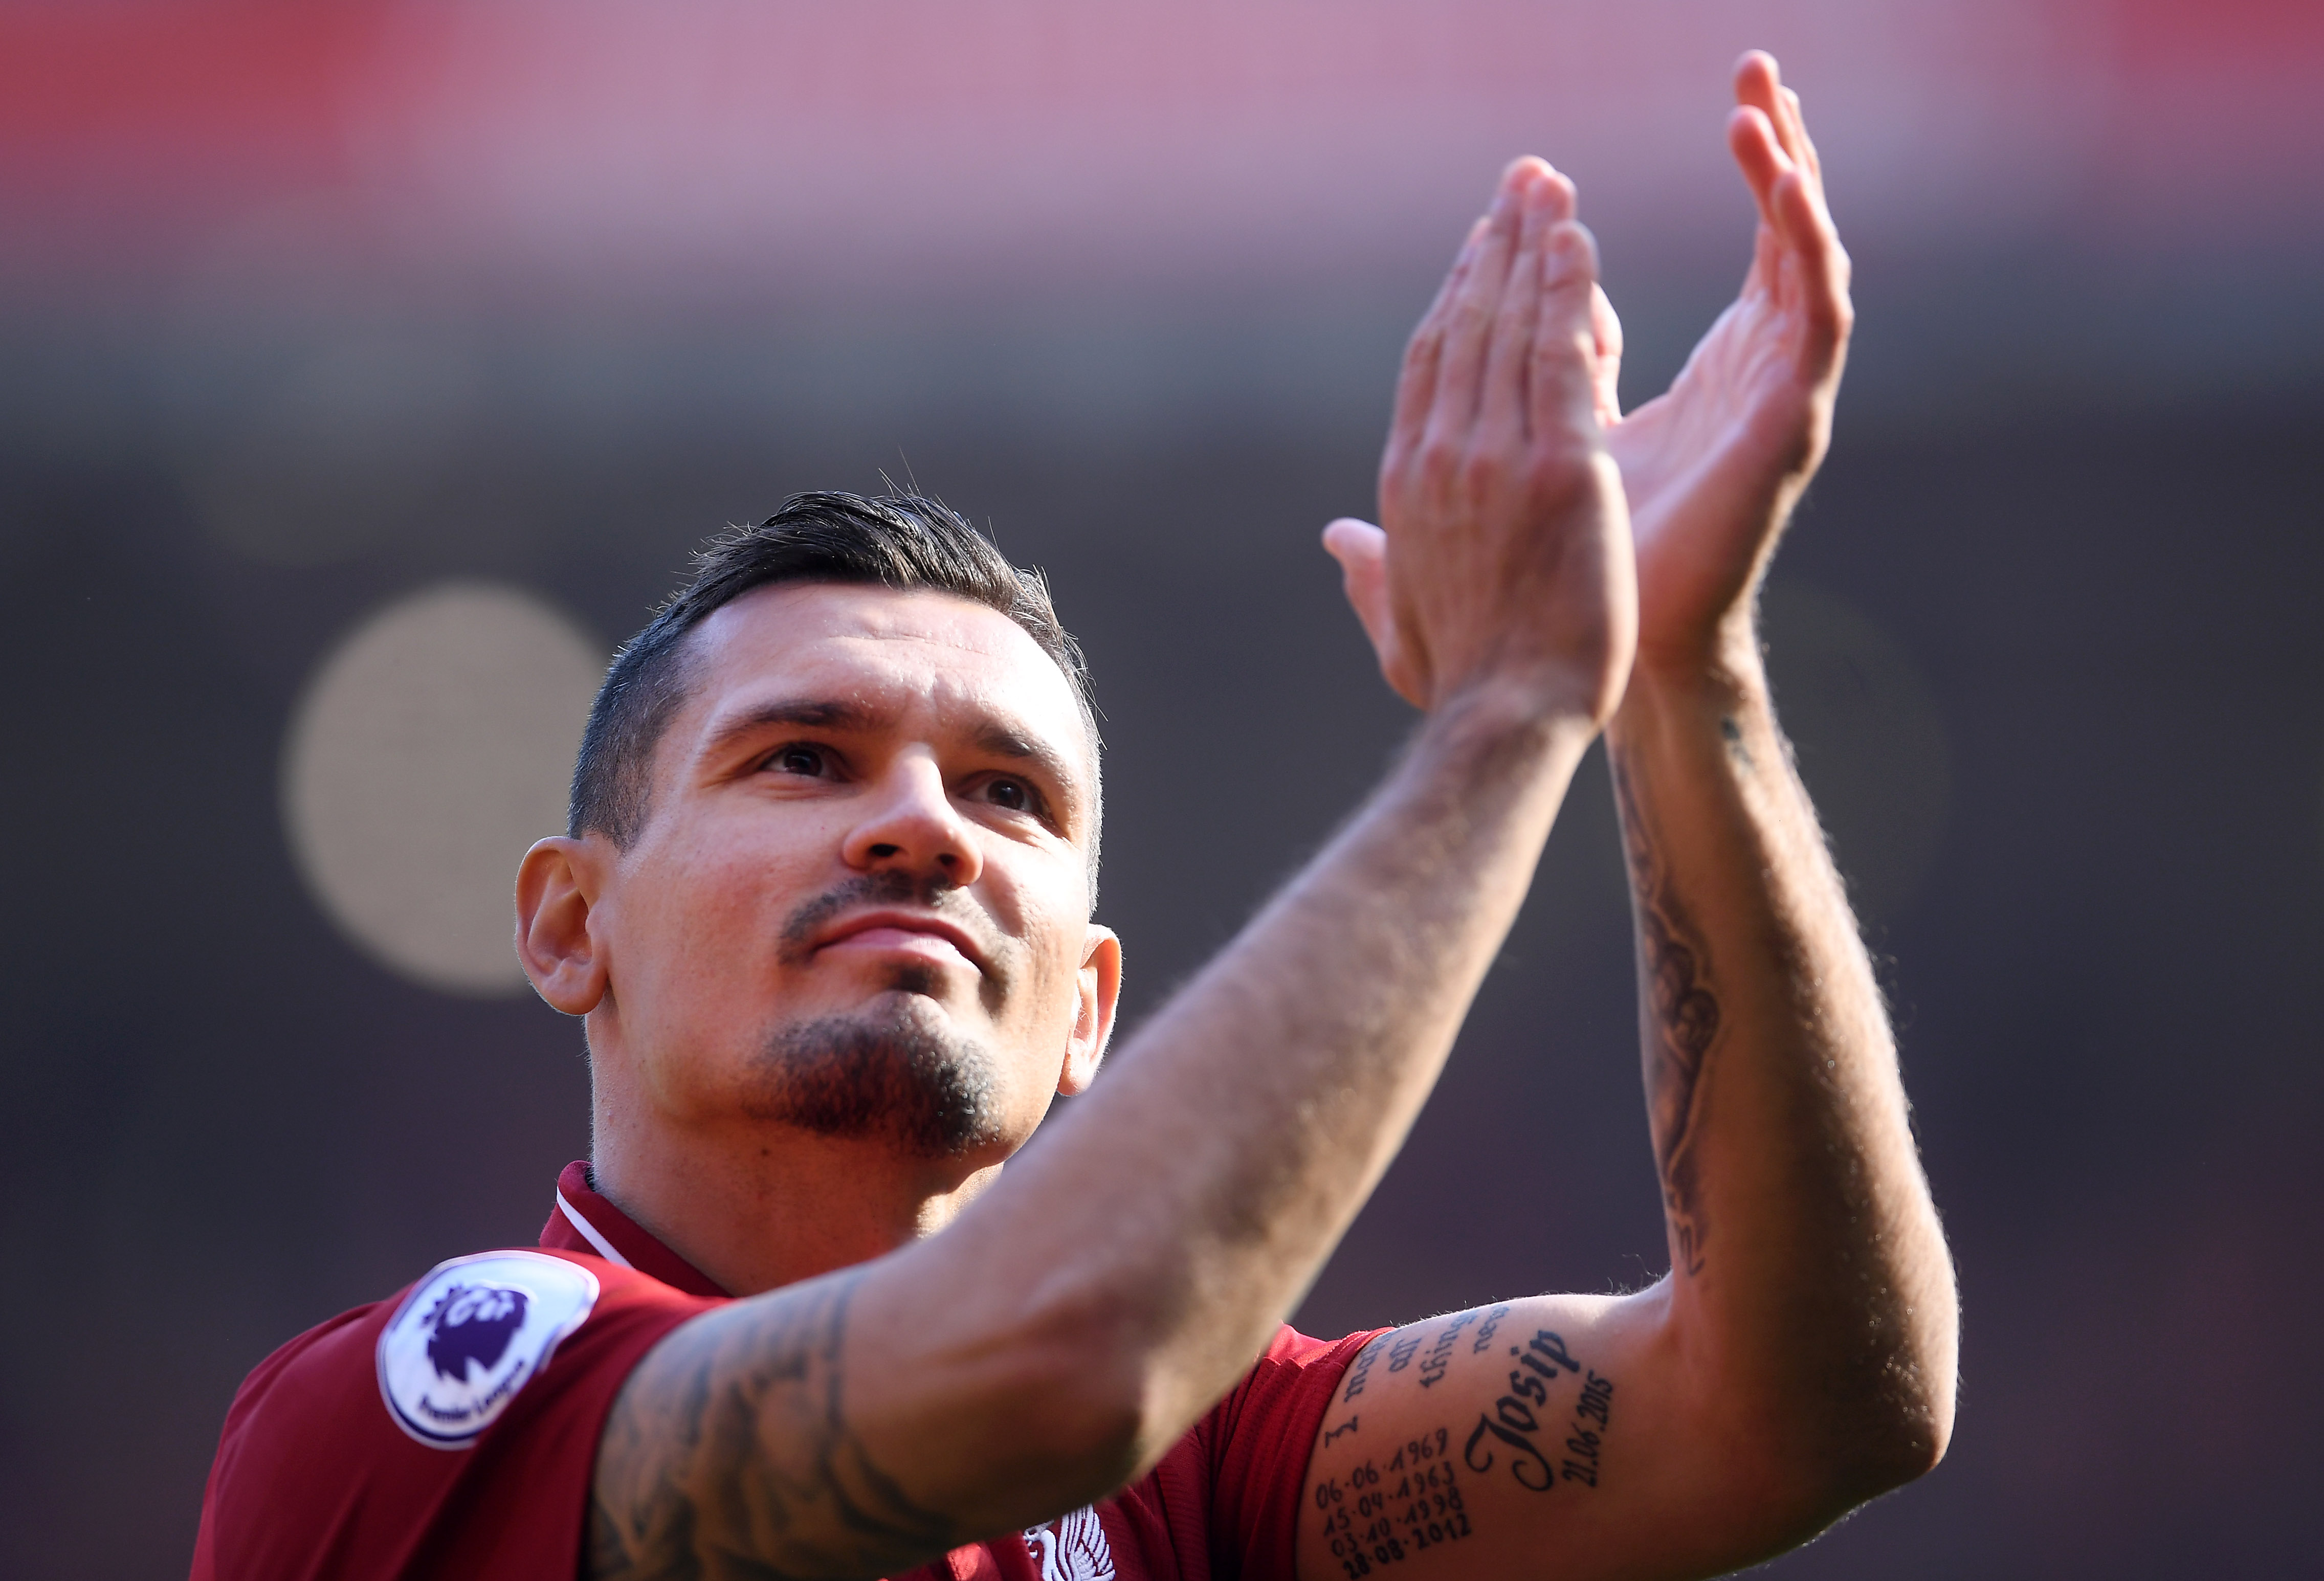 LIVERPOOL, ENGLAND - MAY 12: Dejan Lovren of Liverpool acknowledges the fans after the Premier League match between Liverpool FC and Wolverhampton Wanderers at Anfield on May 12, 2019 in Liverpool, United Kingdom. (Photo by Laurence Griffiths/Getty Images)